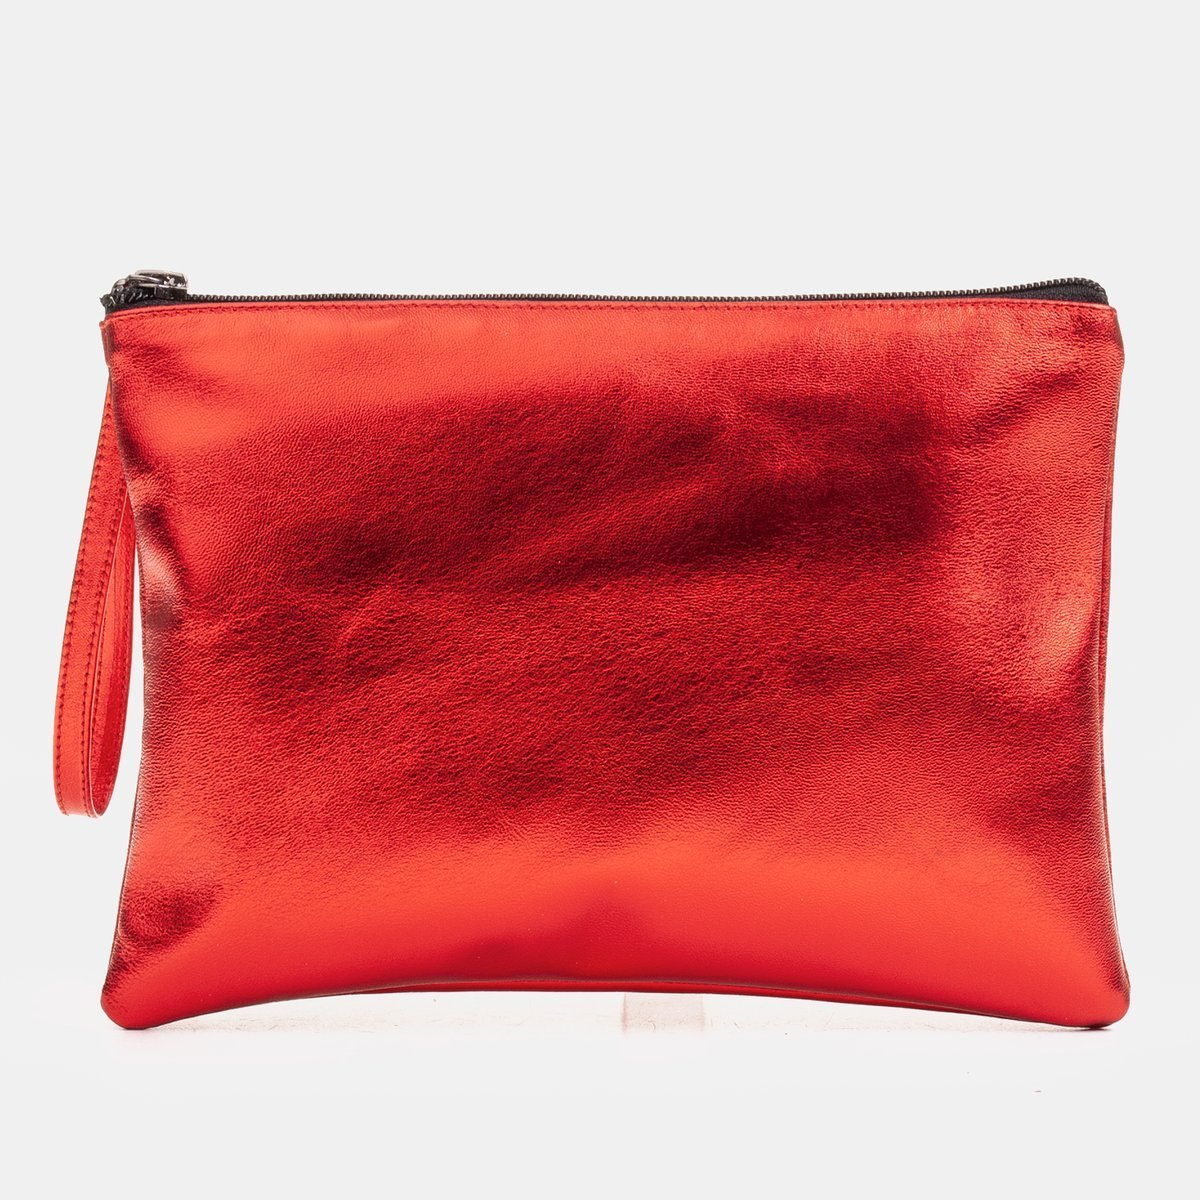 An elegant cosmetic bag made of natural leather